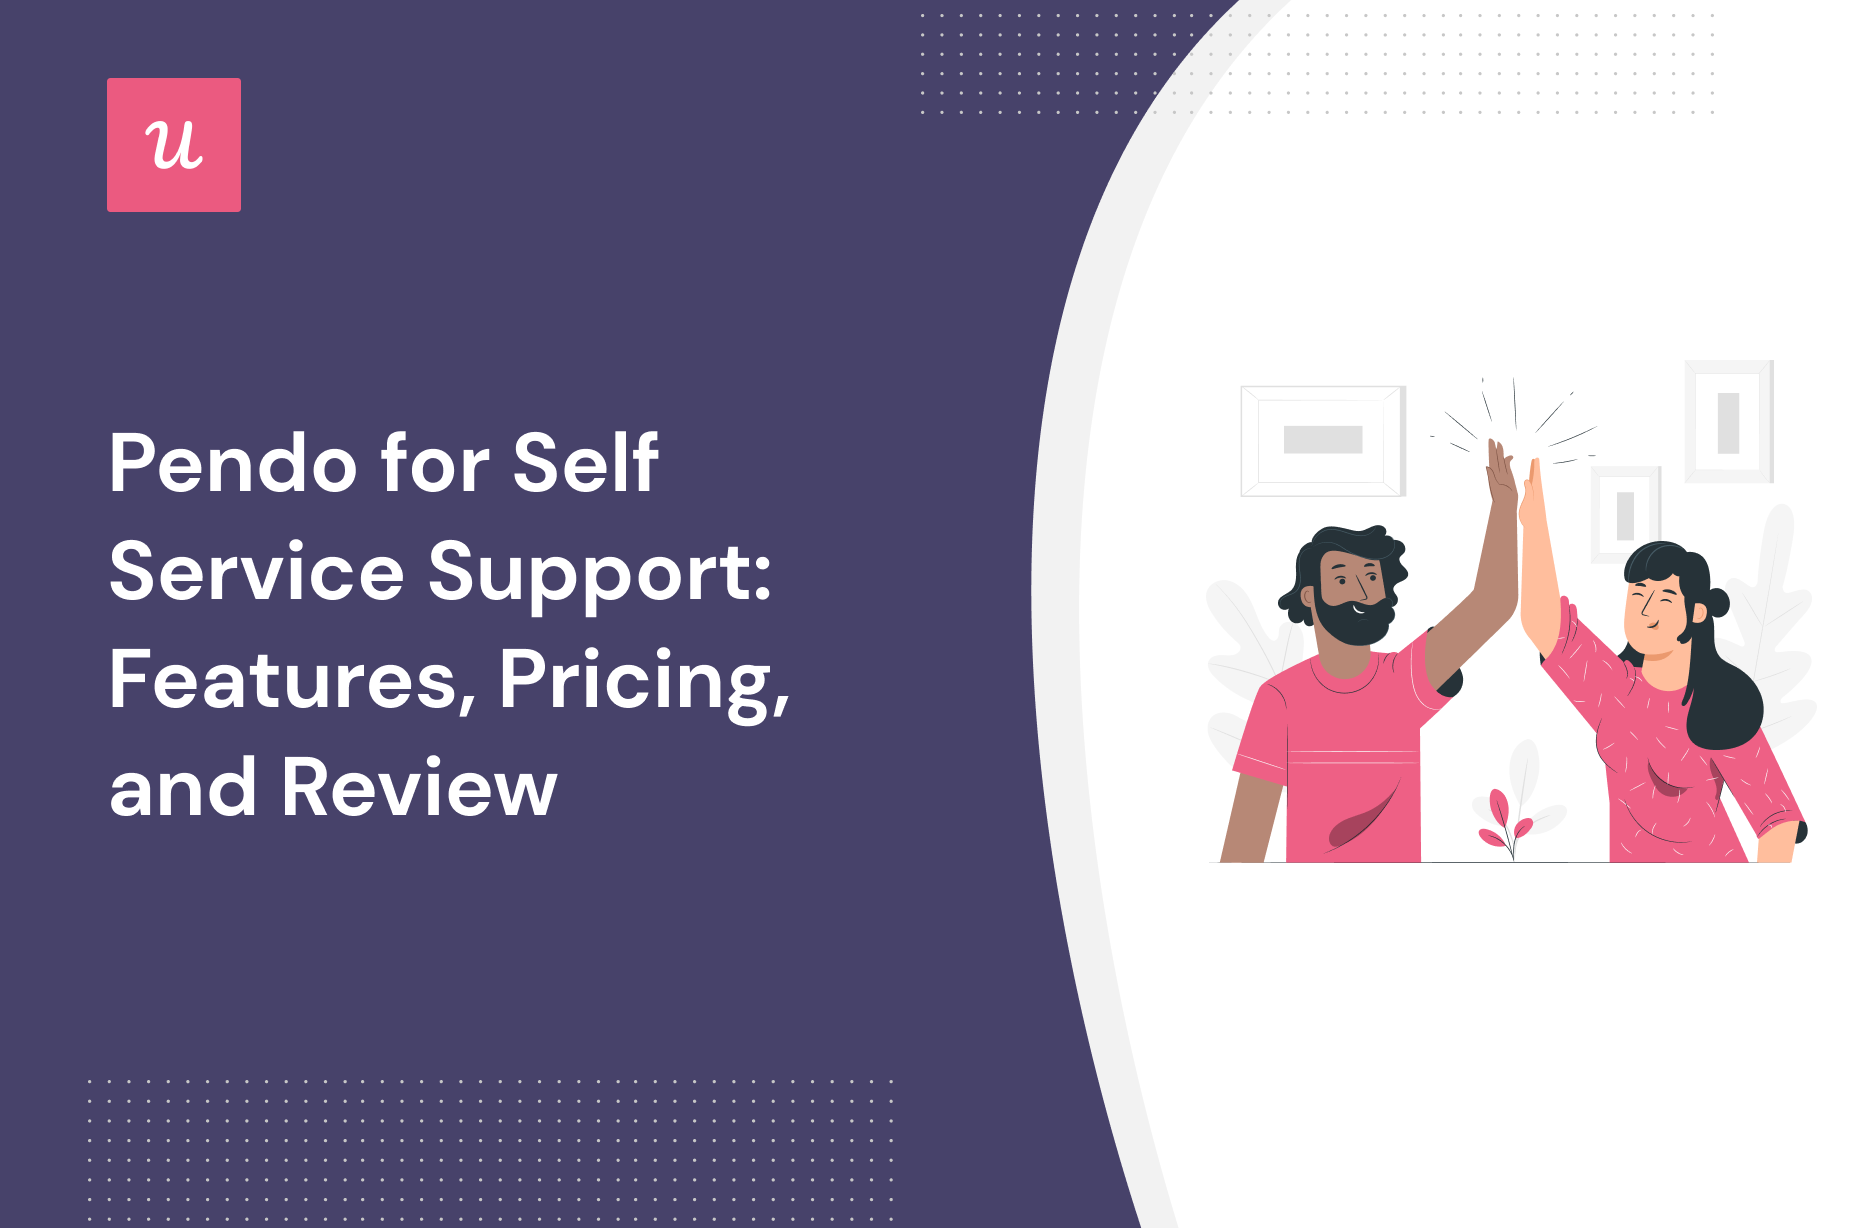 Pendo for Self Service Support: Features, Pricing, and Review